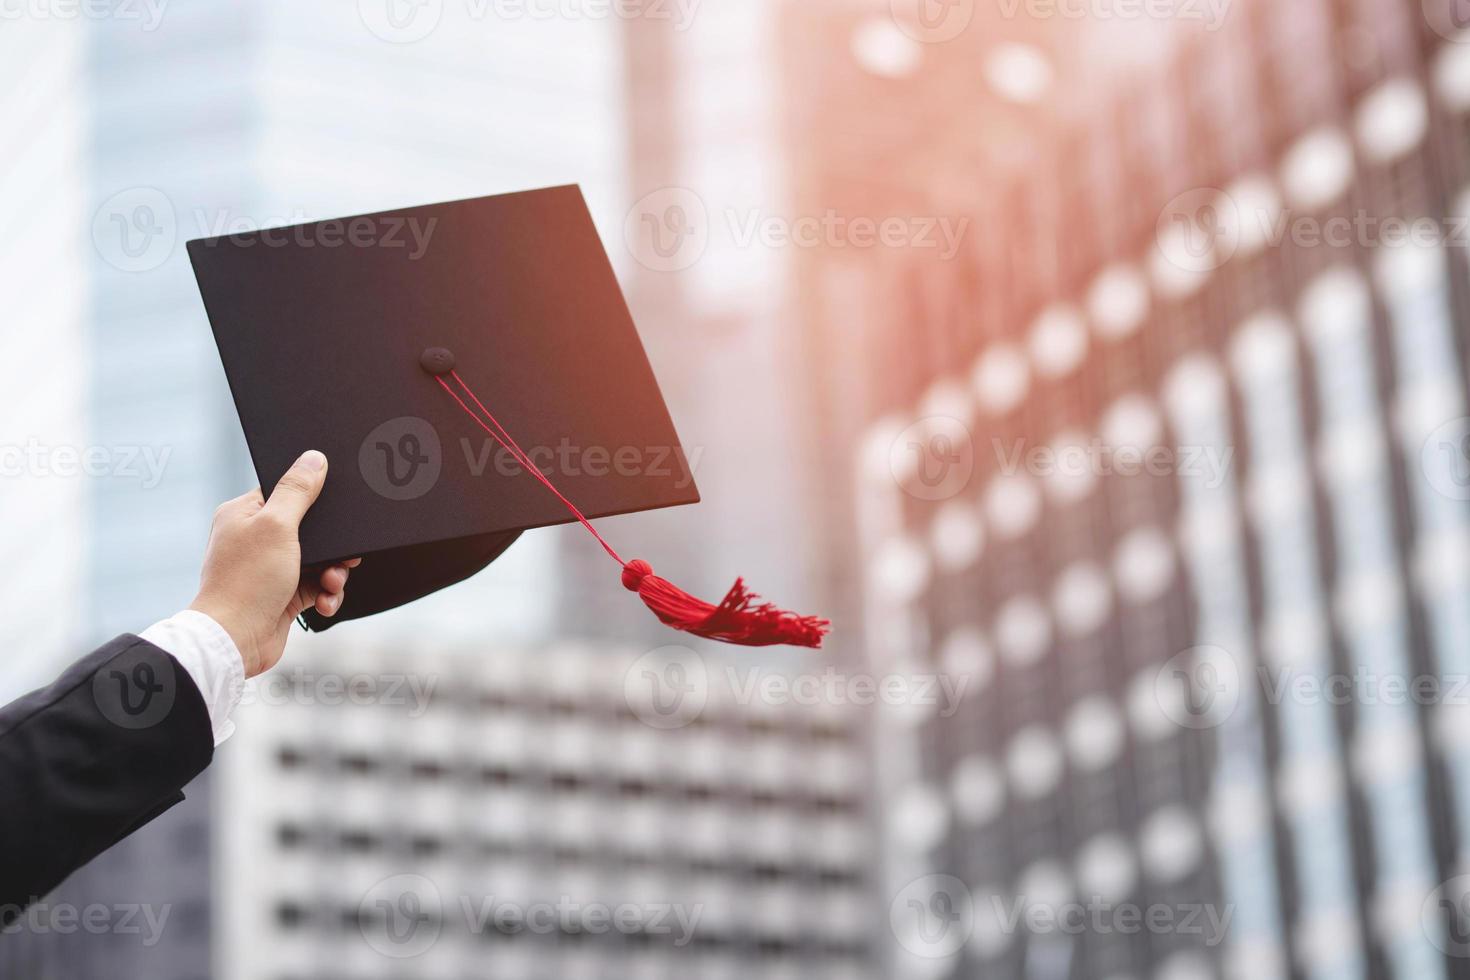 Graduates of the University, businessman holding hats along with success,  filter tone outdoor sunny in the morning. office background. New graduate start working on the first day. Education concept. photo